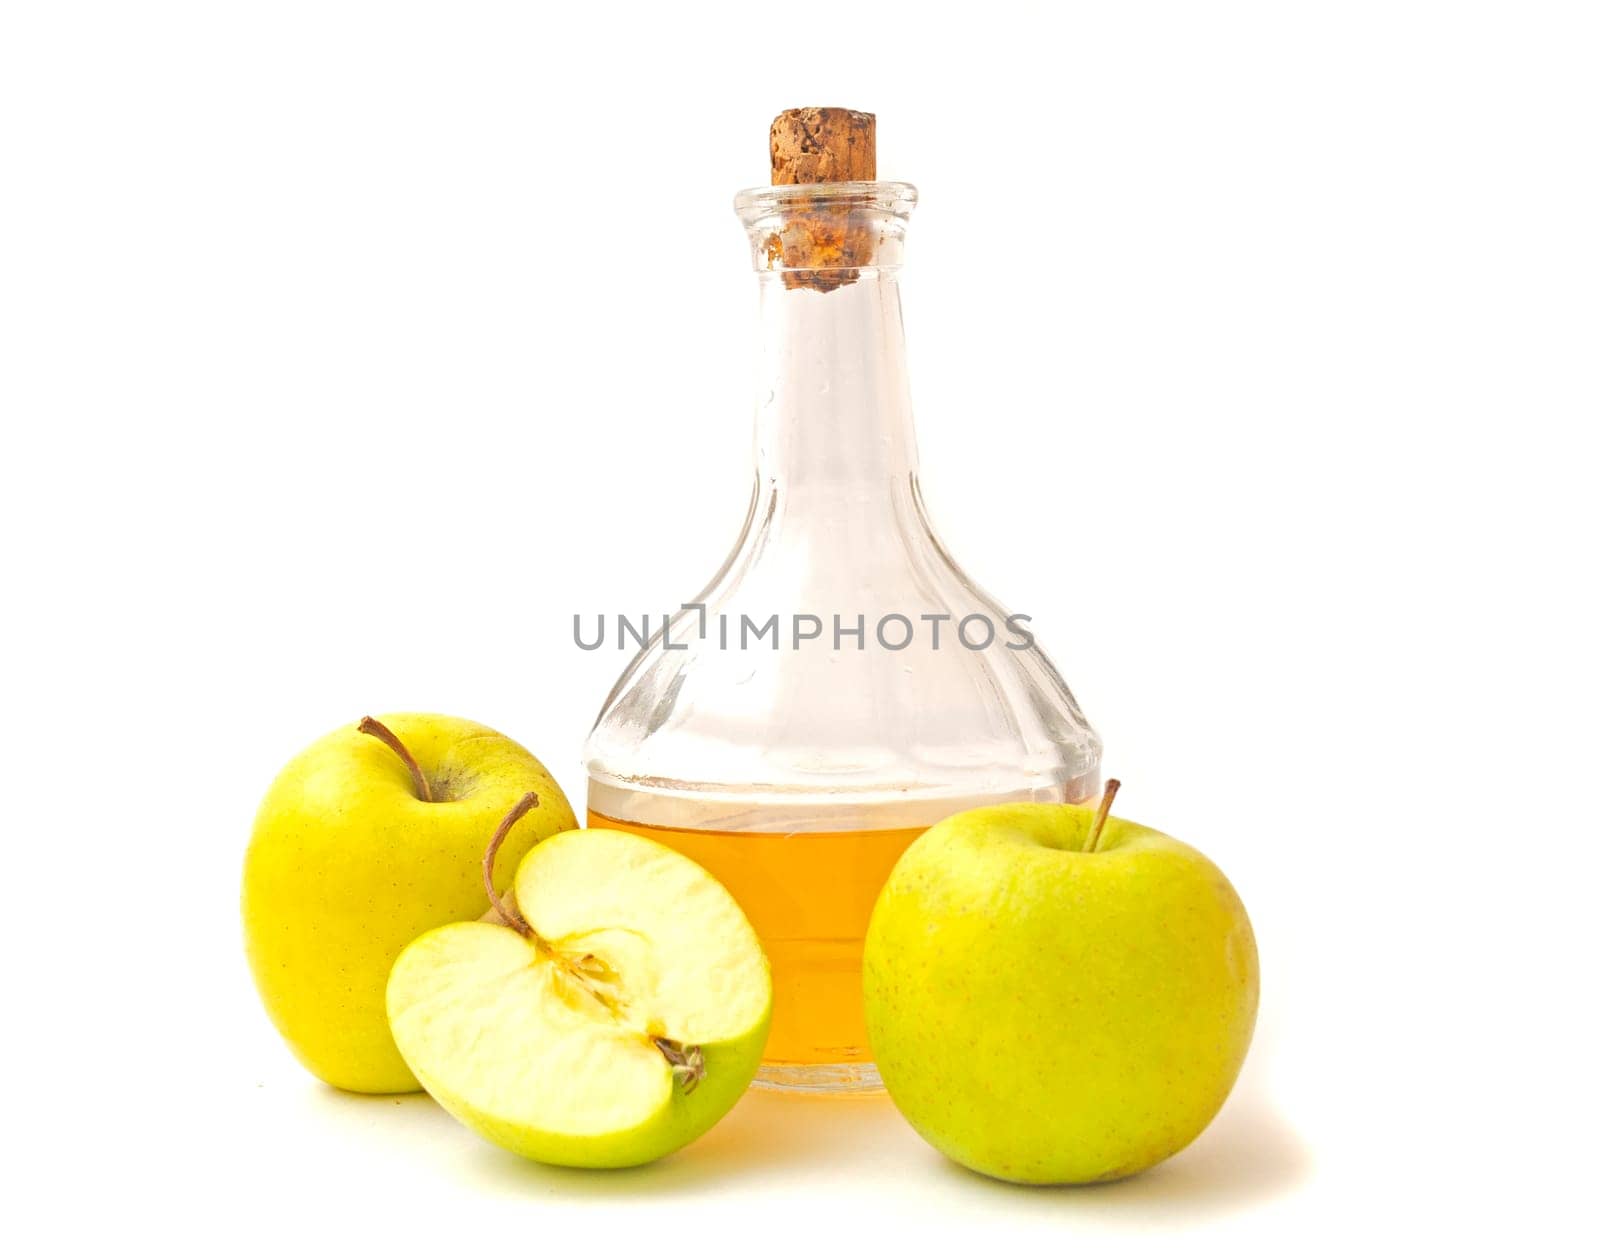 A decanter with apple cider vinegar, two and half apples isolated on white background